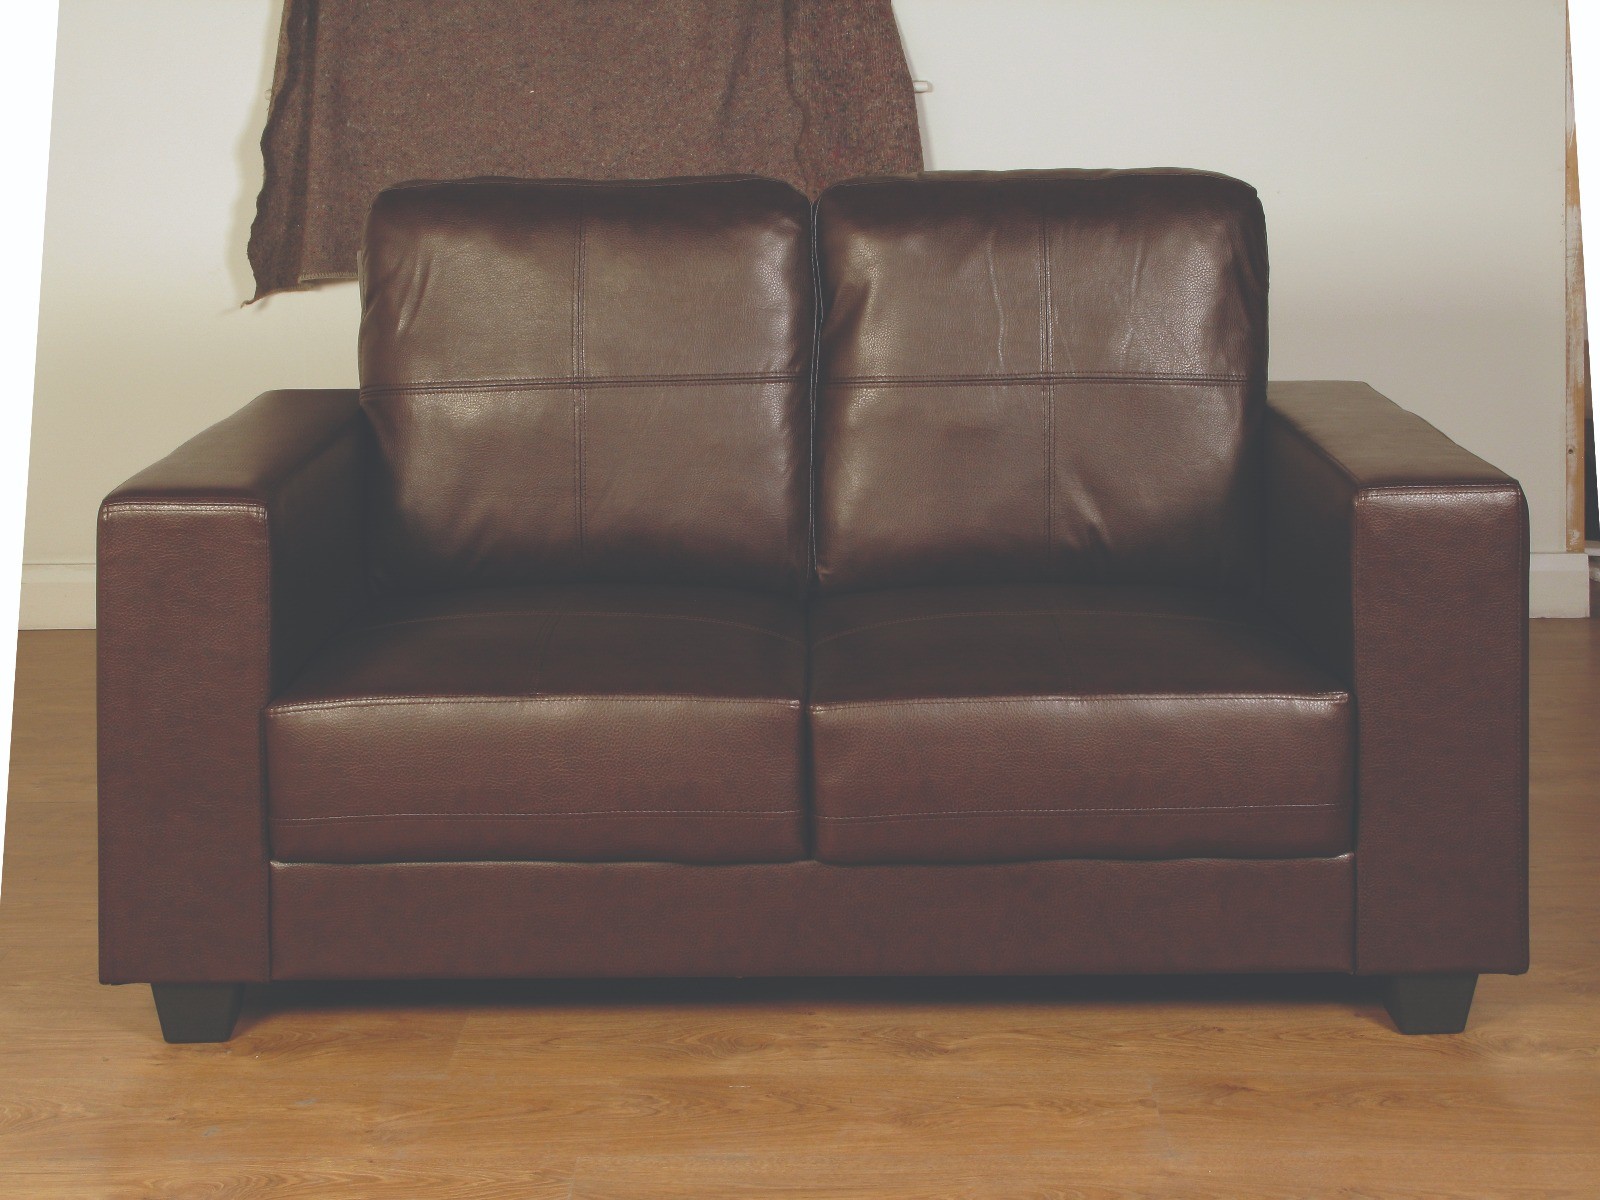 Queensway Brown Faux Leather 2 Seater Sofa, Brown Leather Sofa Bed 2 Seater